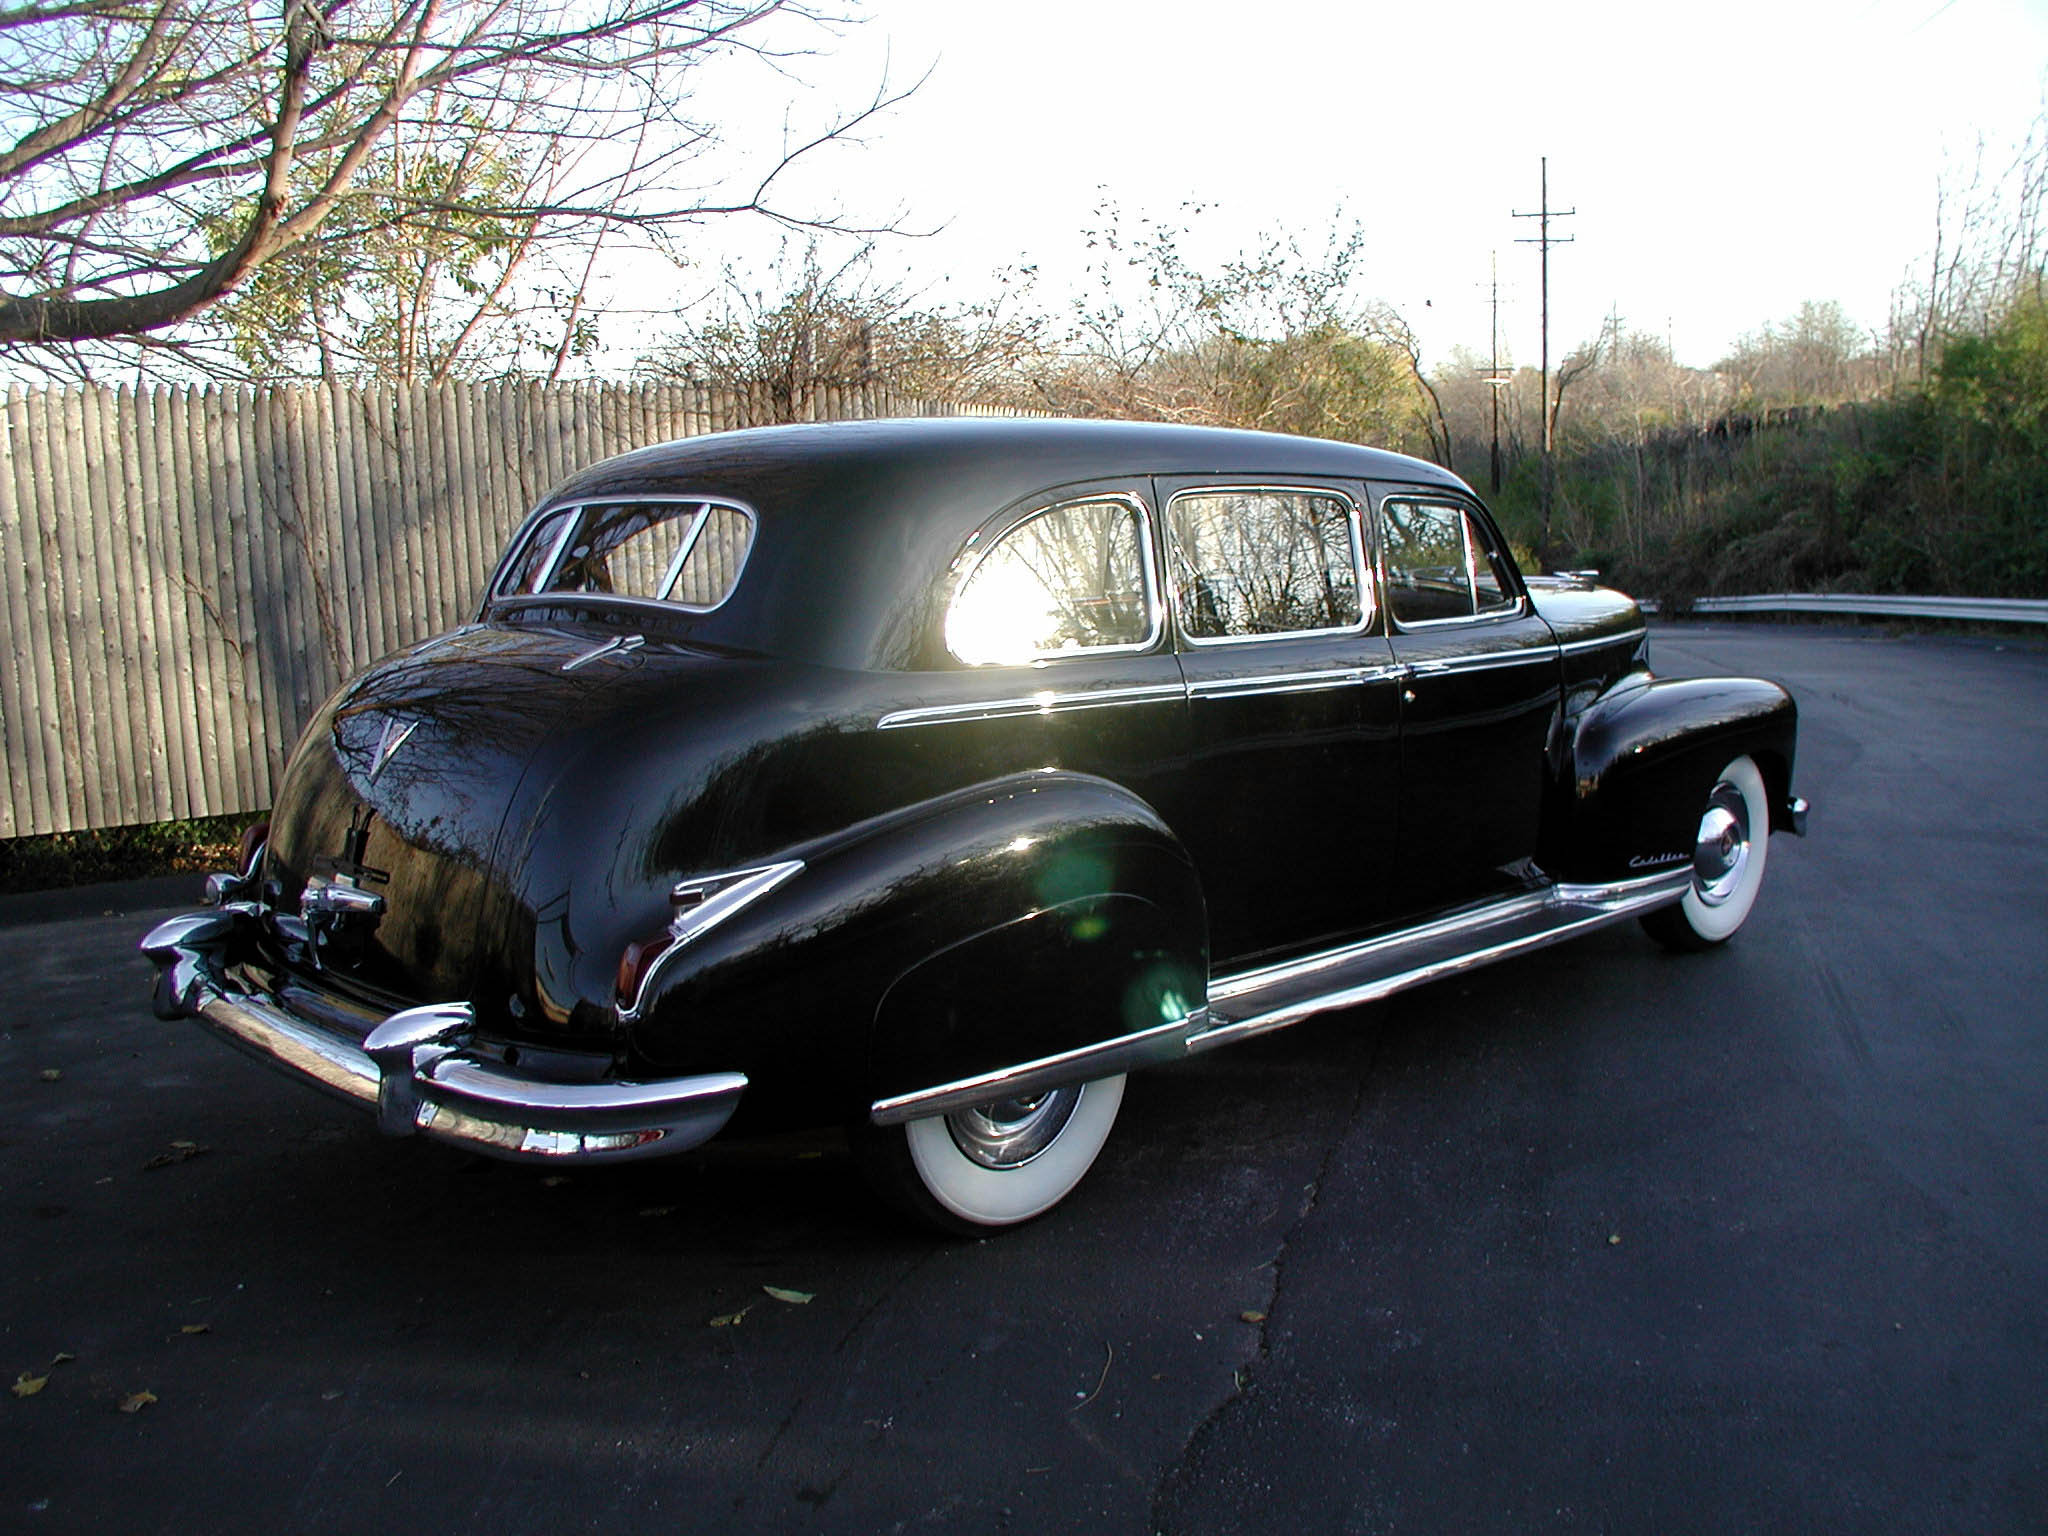 1949 cadillac fleetwood series 75 imperial